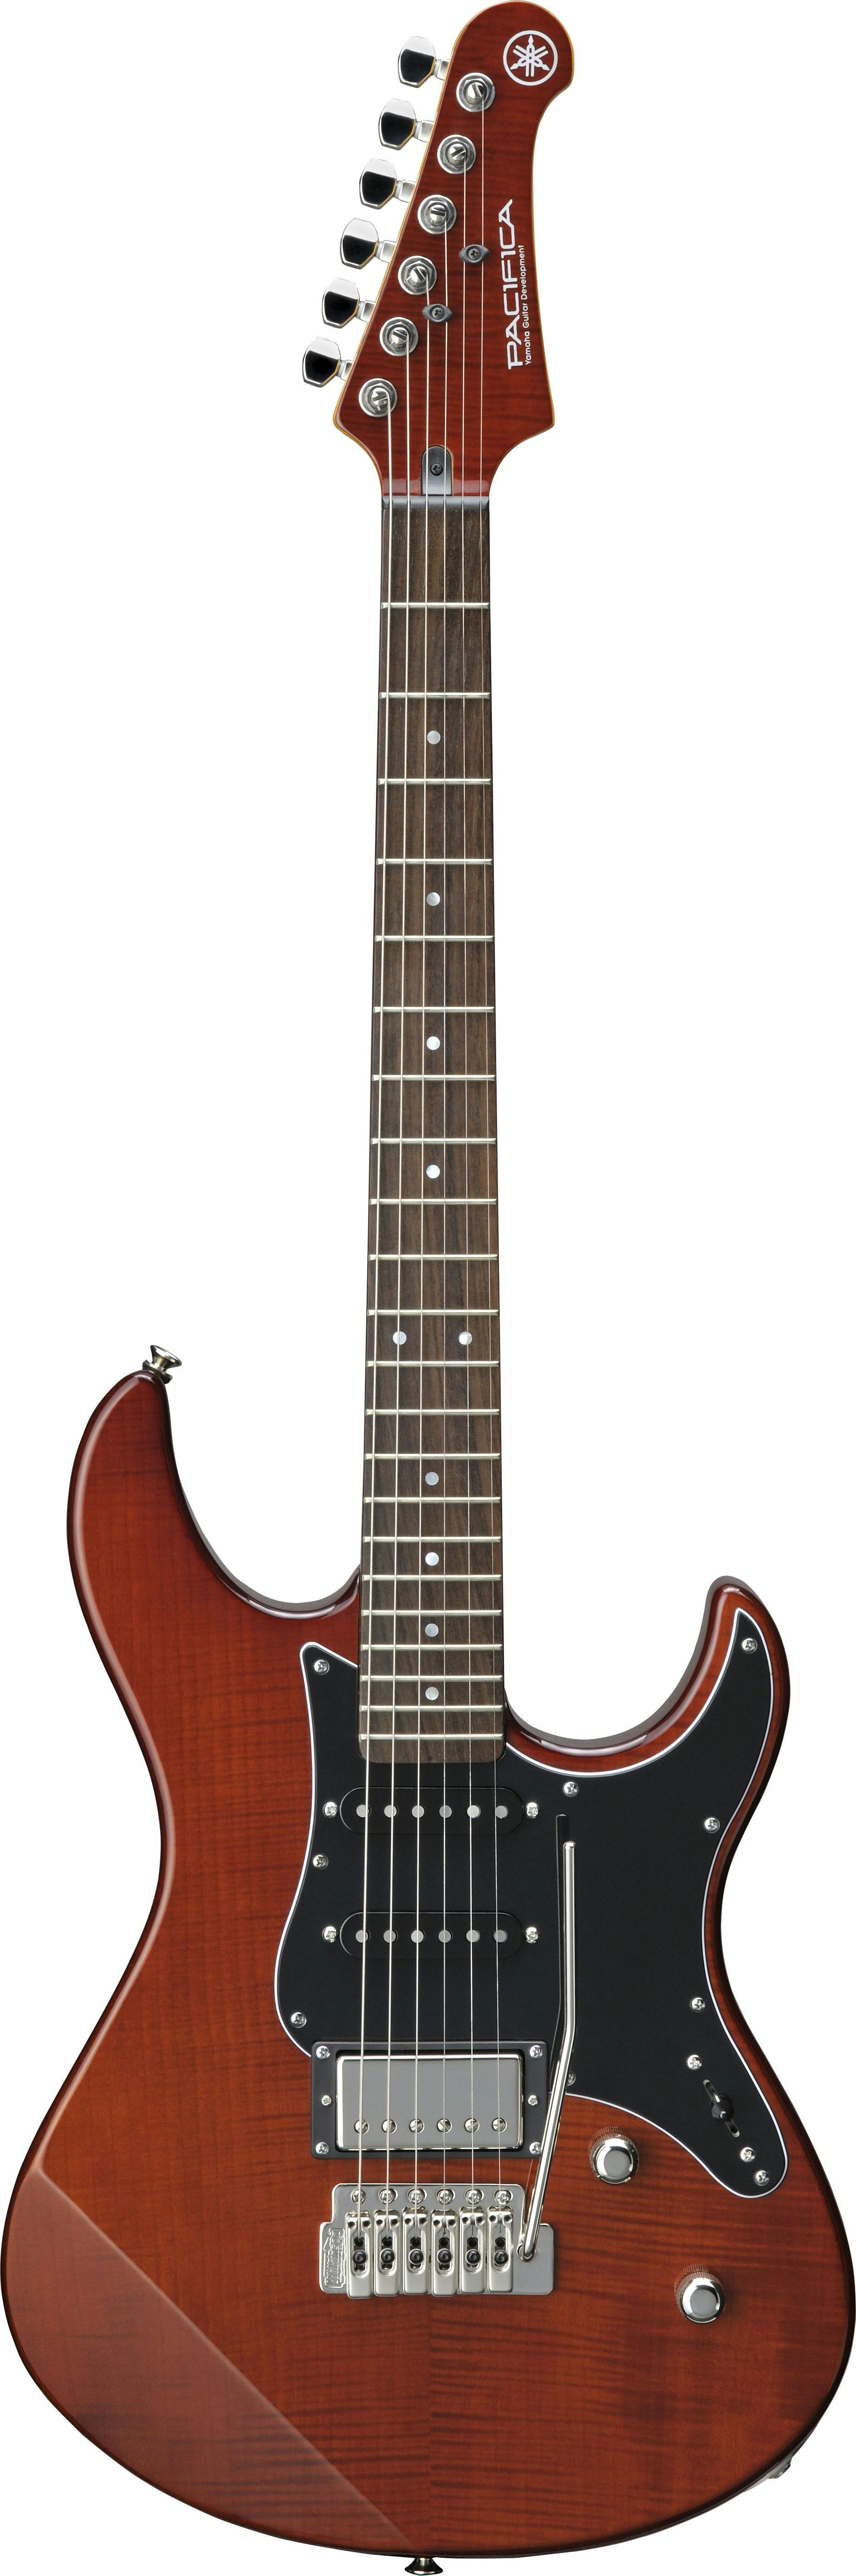 Yamaha Pacifica 612VII Electric Guitar in Flame Maple Root Beer 